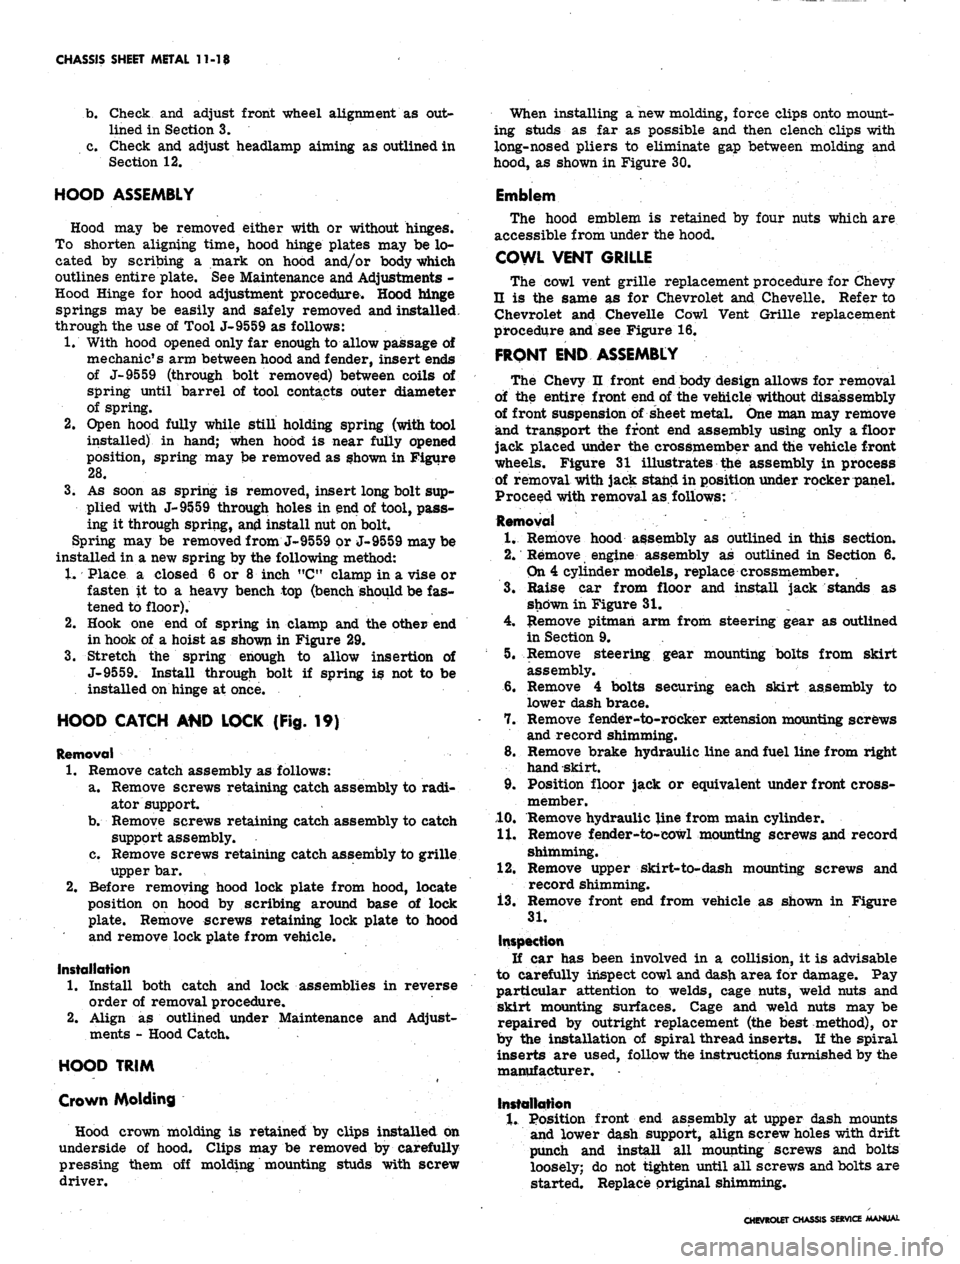 CHEVROLET CAMARO 1967 1.G Chassis Owners Manual 
CHASSIS SHEET METAL 11-18

b.
 Check and adjust front wheel alignment as out-

lined in Section 3.

c. Check and adjust headlamp aiming as outlined in

Section 12.

HOOD ASSEMBLY

Hood may be removed